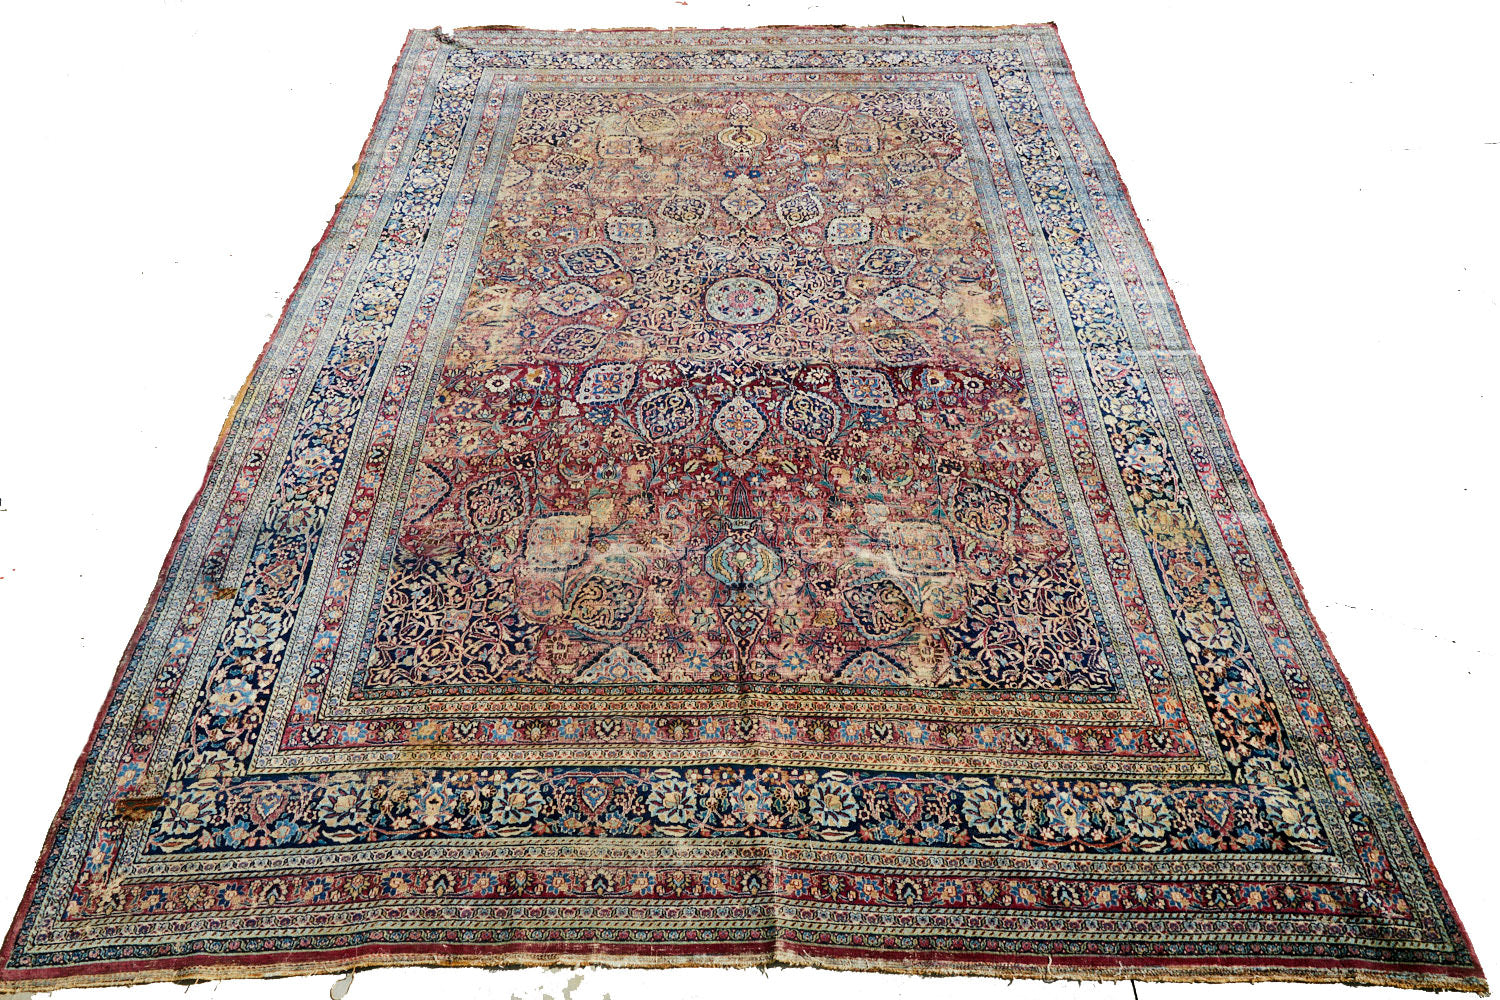 Hand woven antique room-sized Meshed Persian Rug with burgundy purple red base and blue, cream and gold intricately woven patterns of flowers and vines with large medallion in center - Available from King Kennedy Rugs Los Angeles